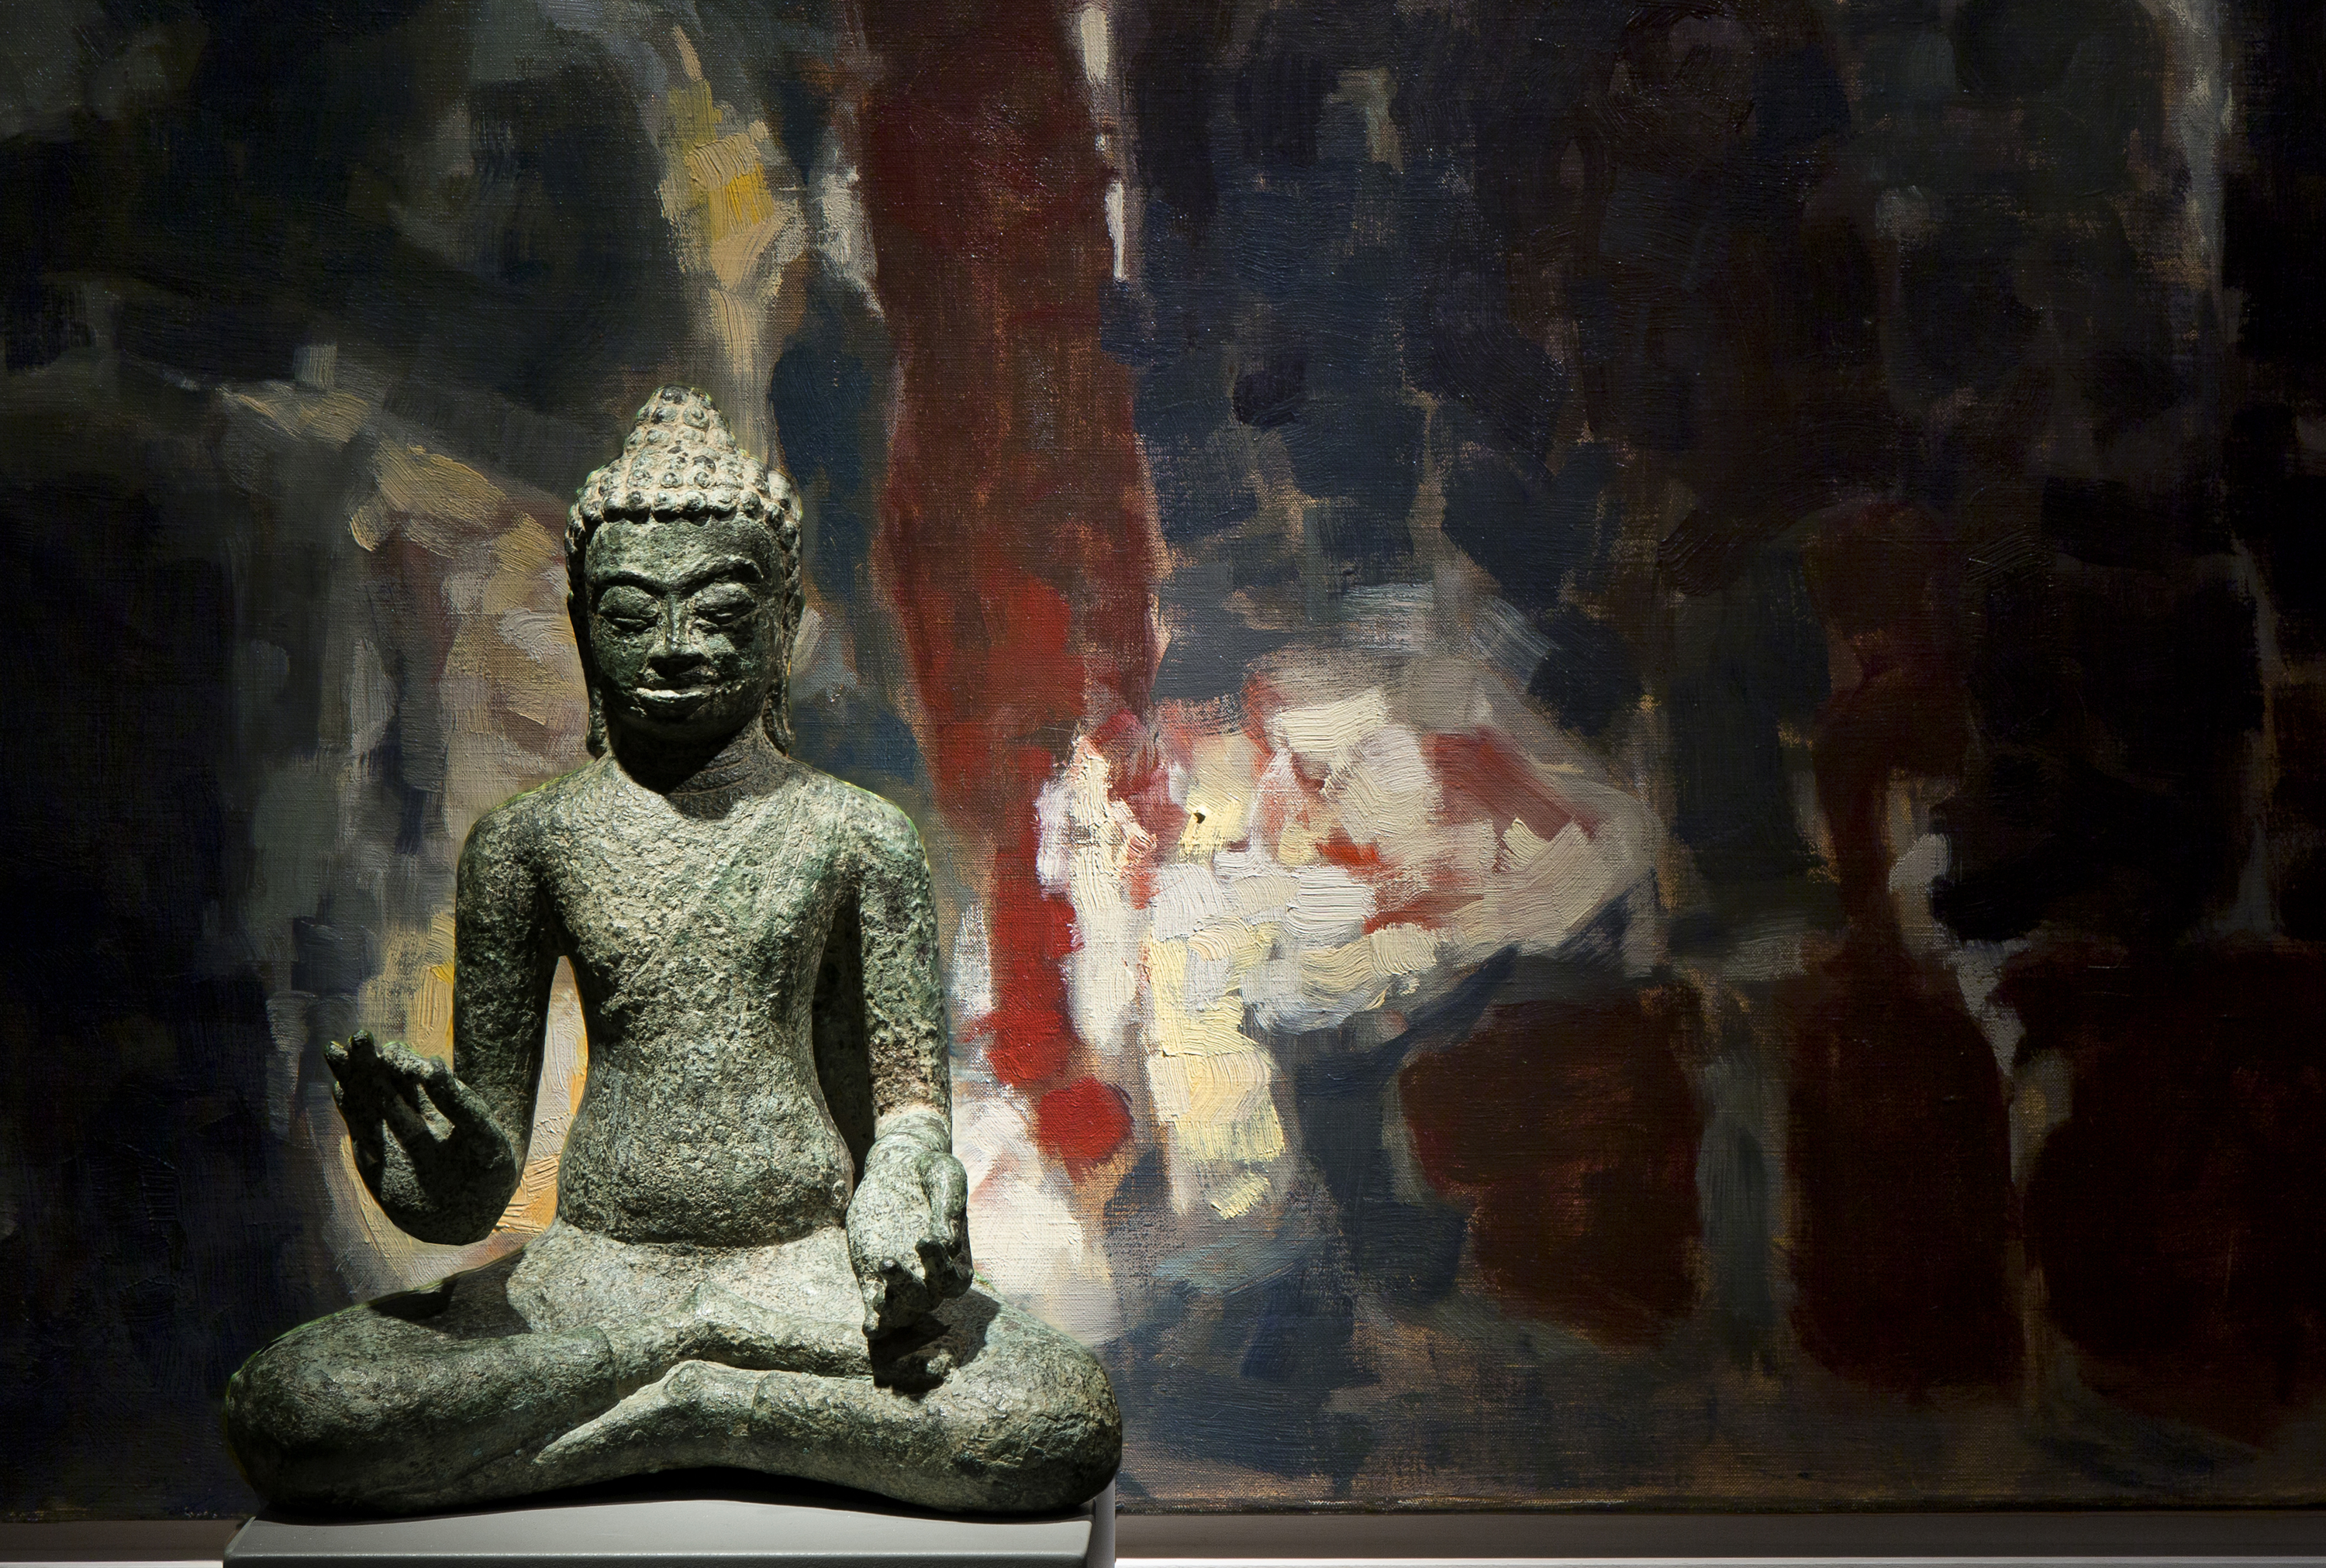 Synthesis and Abstraction - Khmer sculptures and landscapes by Paul Kallos